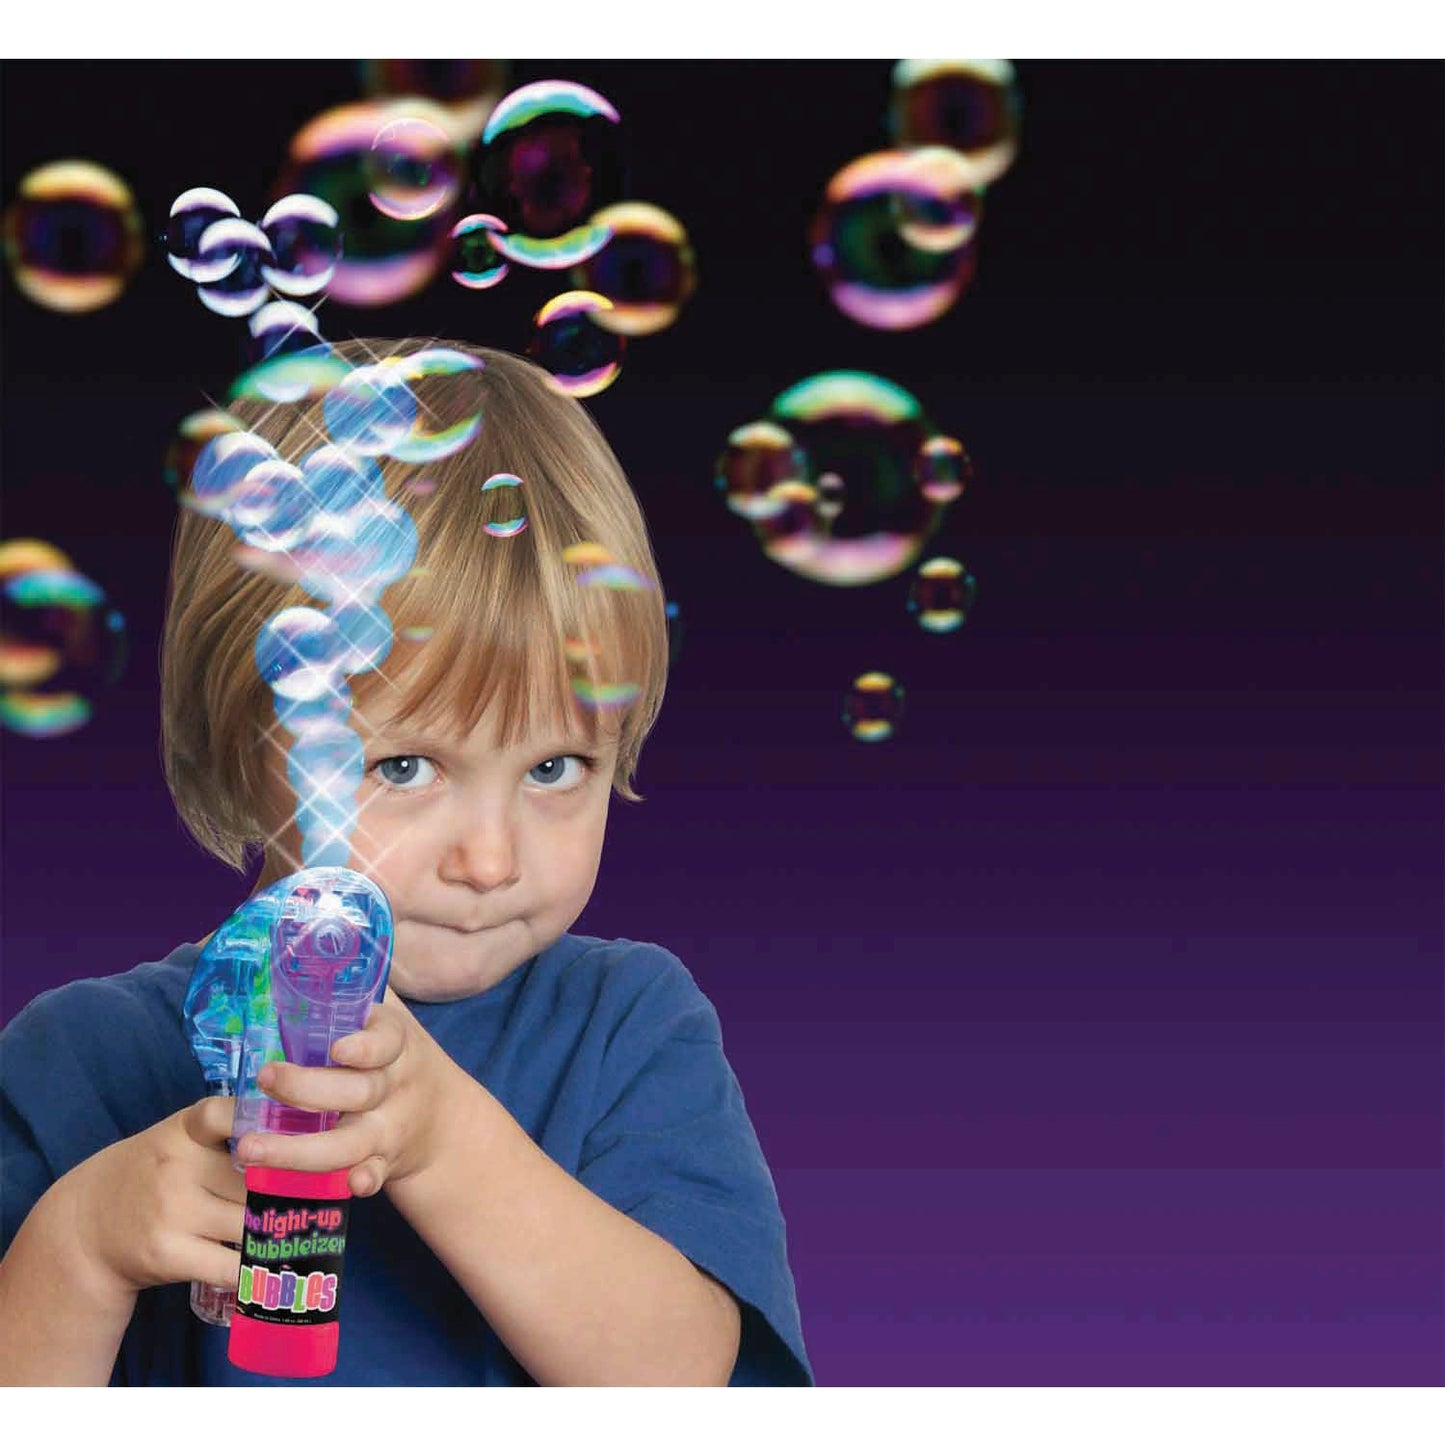 Can You Imagine Light-Up Bubbleizer Bubble Blowing Toy